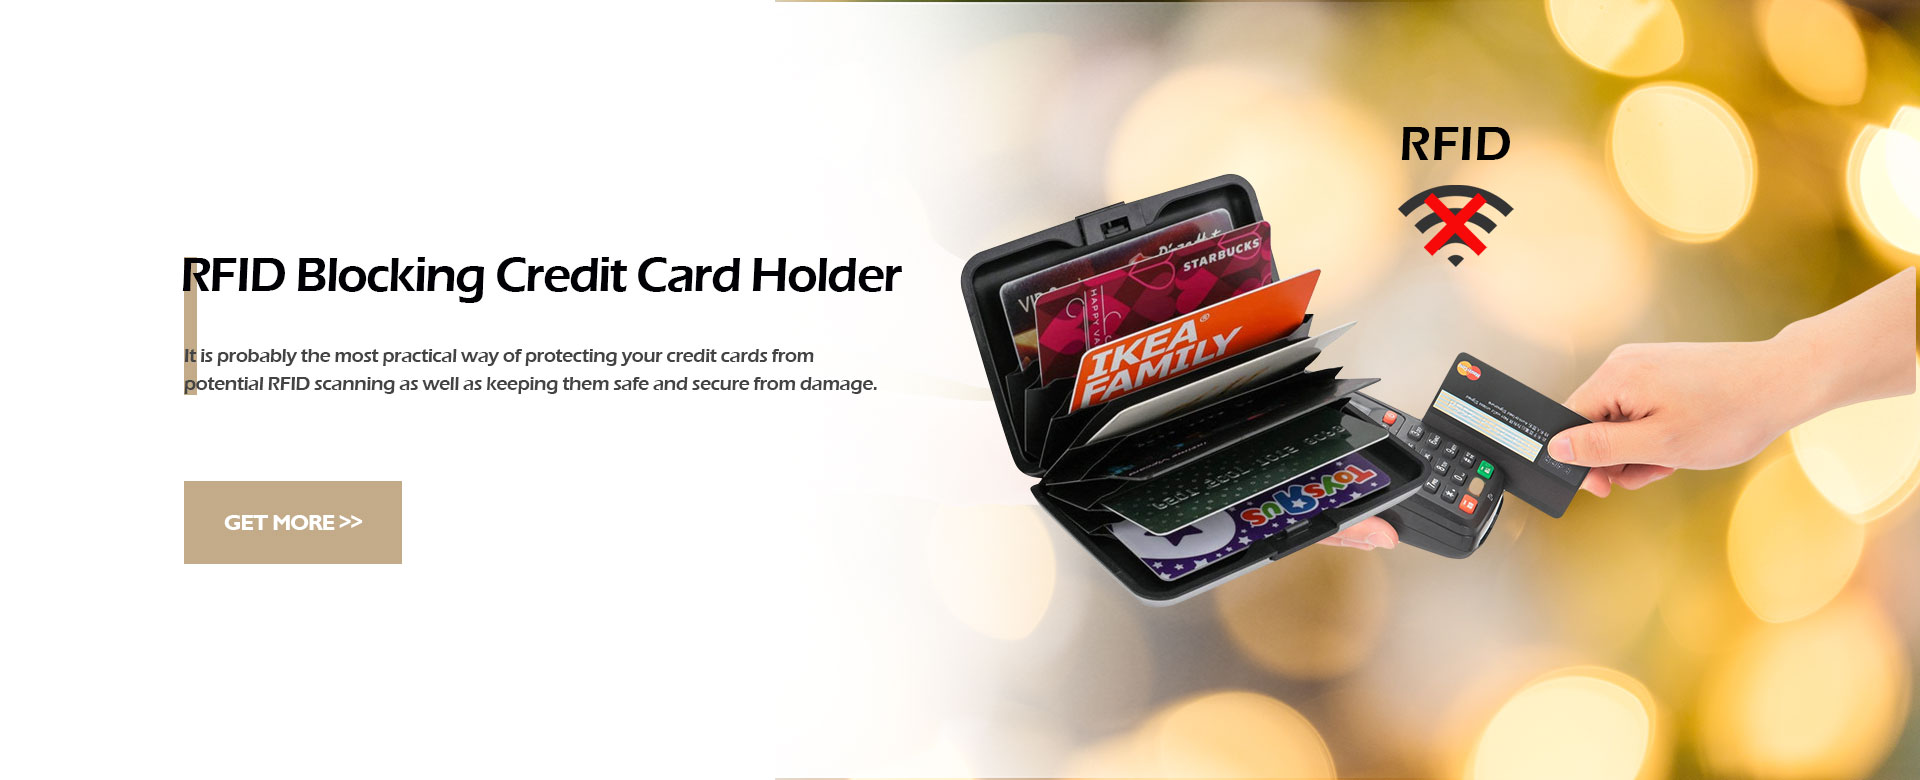 RFID Wallet Manufacturers and Suppliers